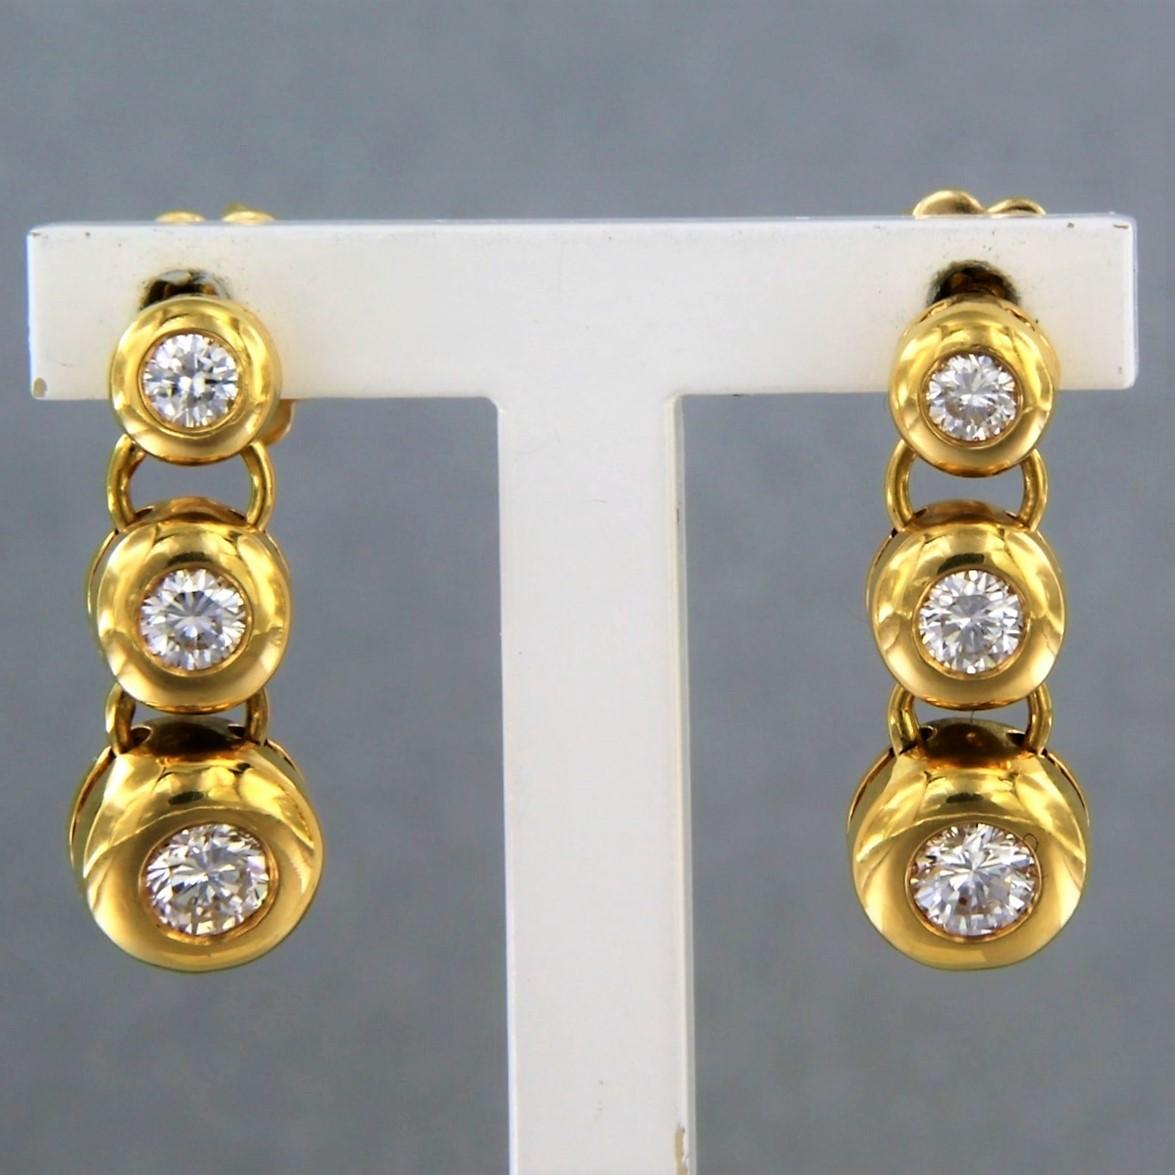 18k yellow gold earrings set with brilliant cut diamond 0.65 ct - F/G - VS/SI

detailed description:

size of the earring is approximately 1.8 cm by 6.6 mm

total weight: 6.8 grams

occupied with:

- 6 x 2.4 mm - 3.4 mm cut diamond, total